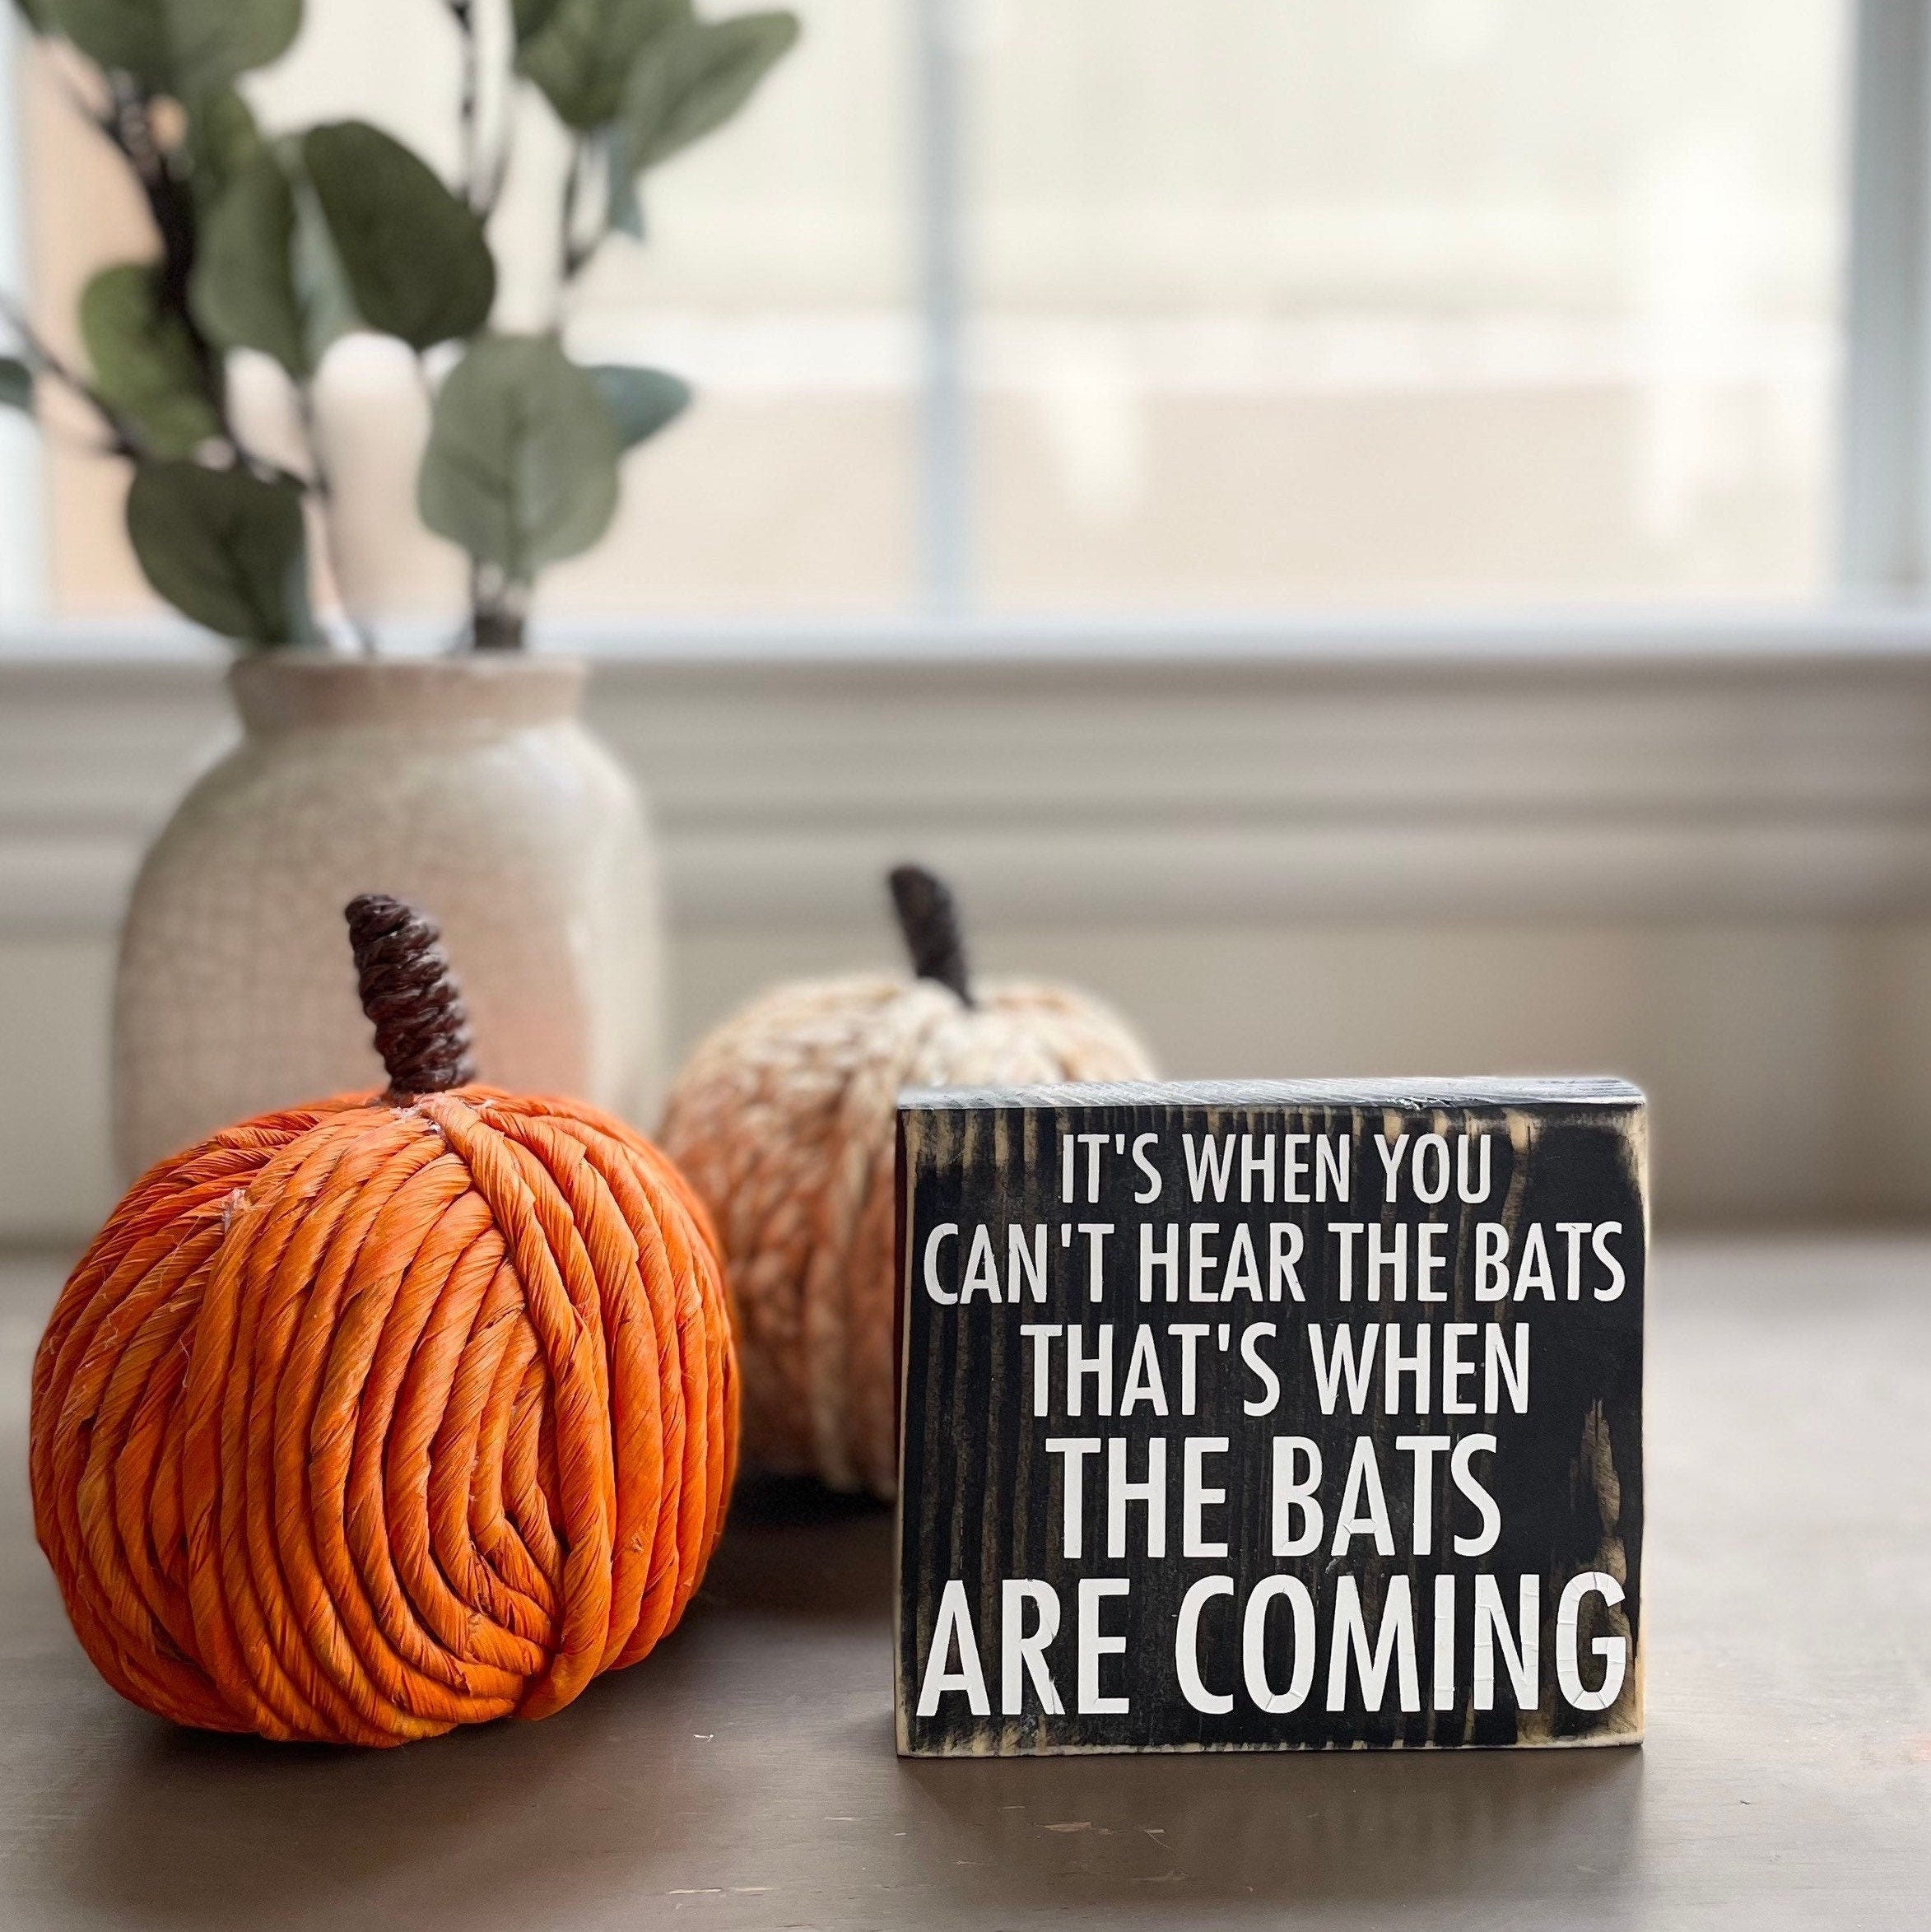 small square wood sign stained black with white lettering that reads in all caps "it's when you can't hear the bats that's when the bats are coming". The words are divided onto 5 lines. The size of the font gets bigger on each line